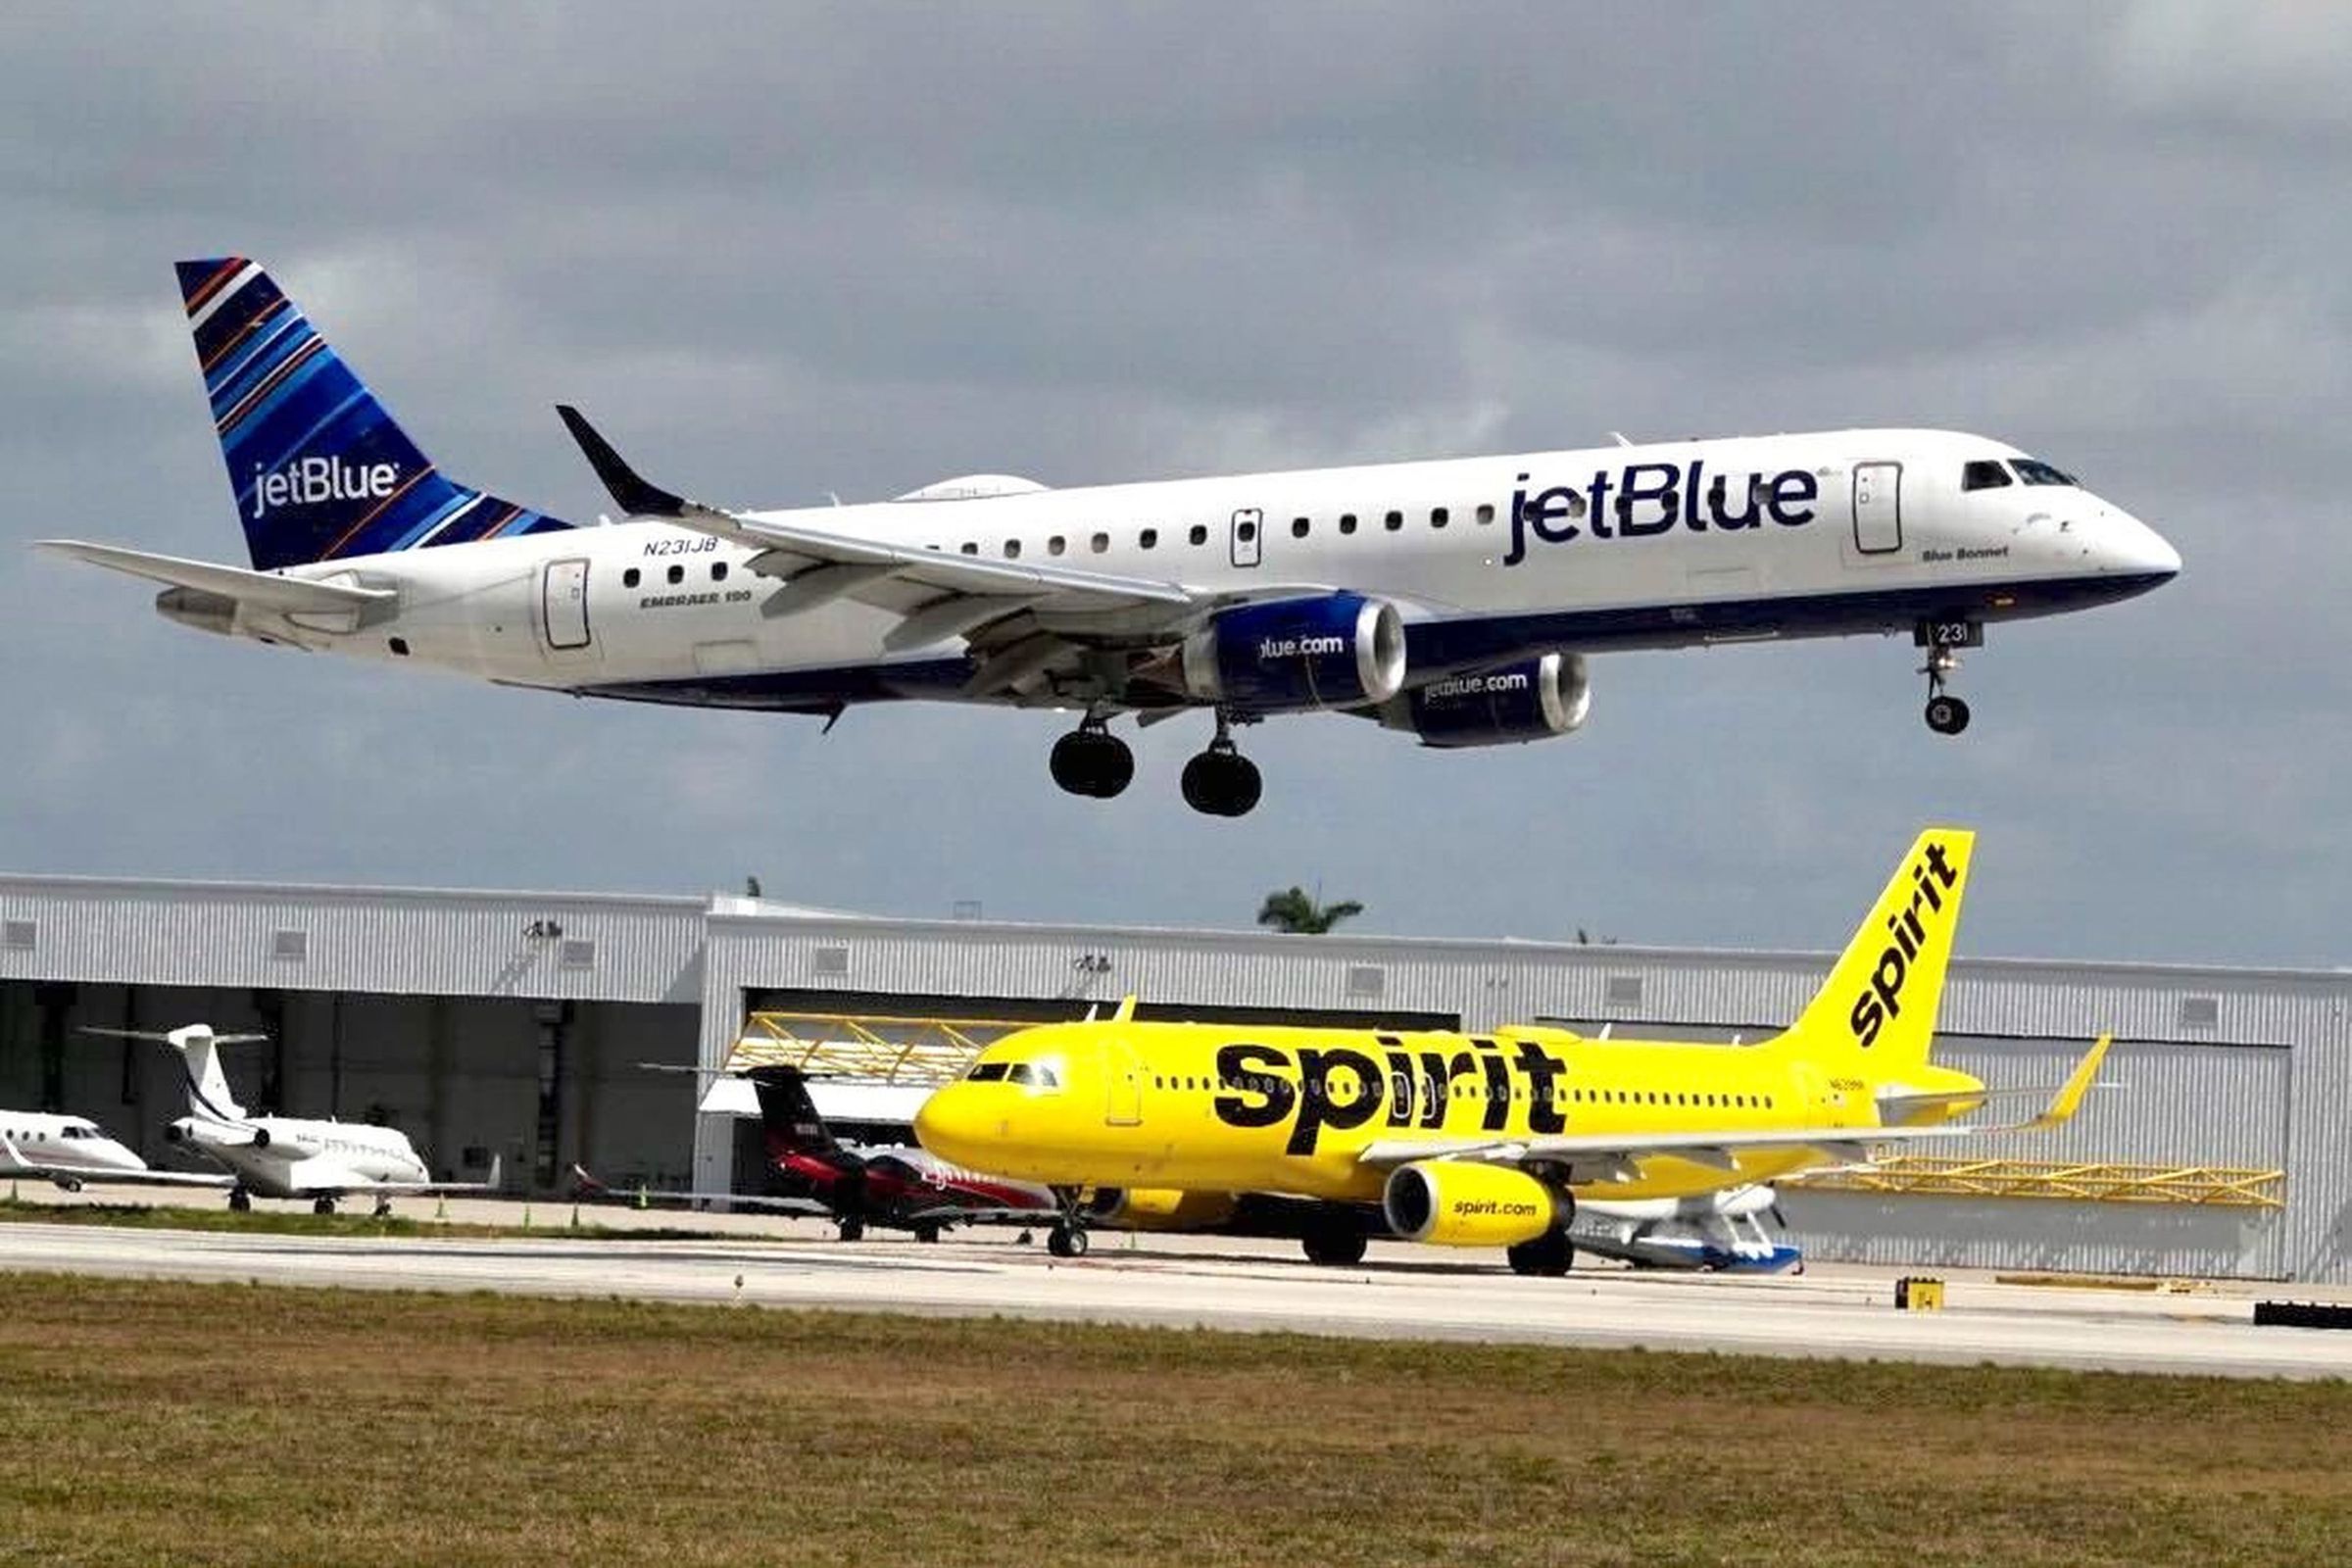 A JetBlue and Spirit Airways plane at a Florida airport